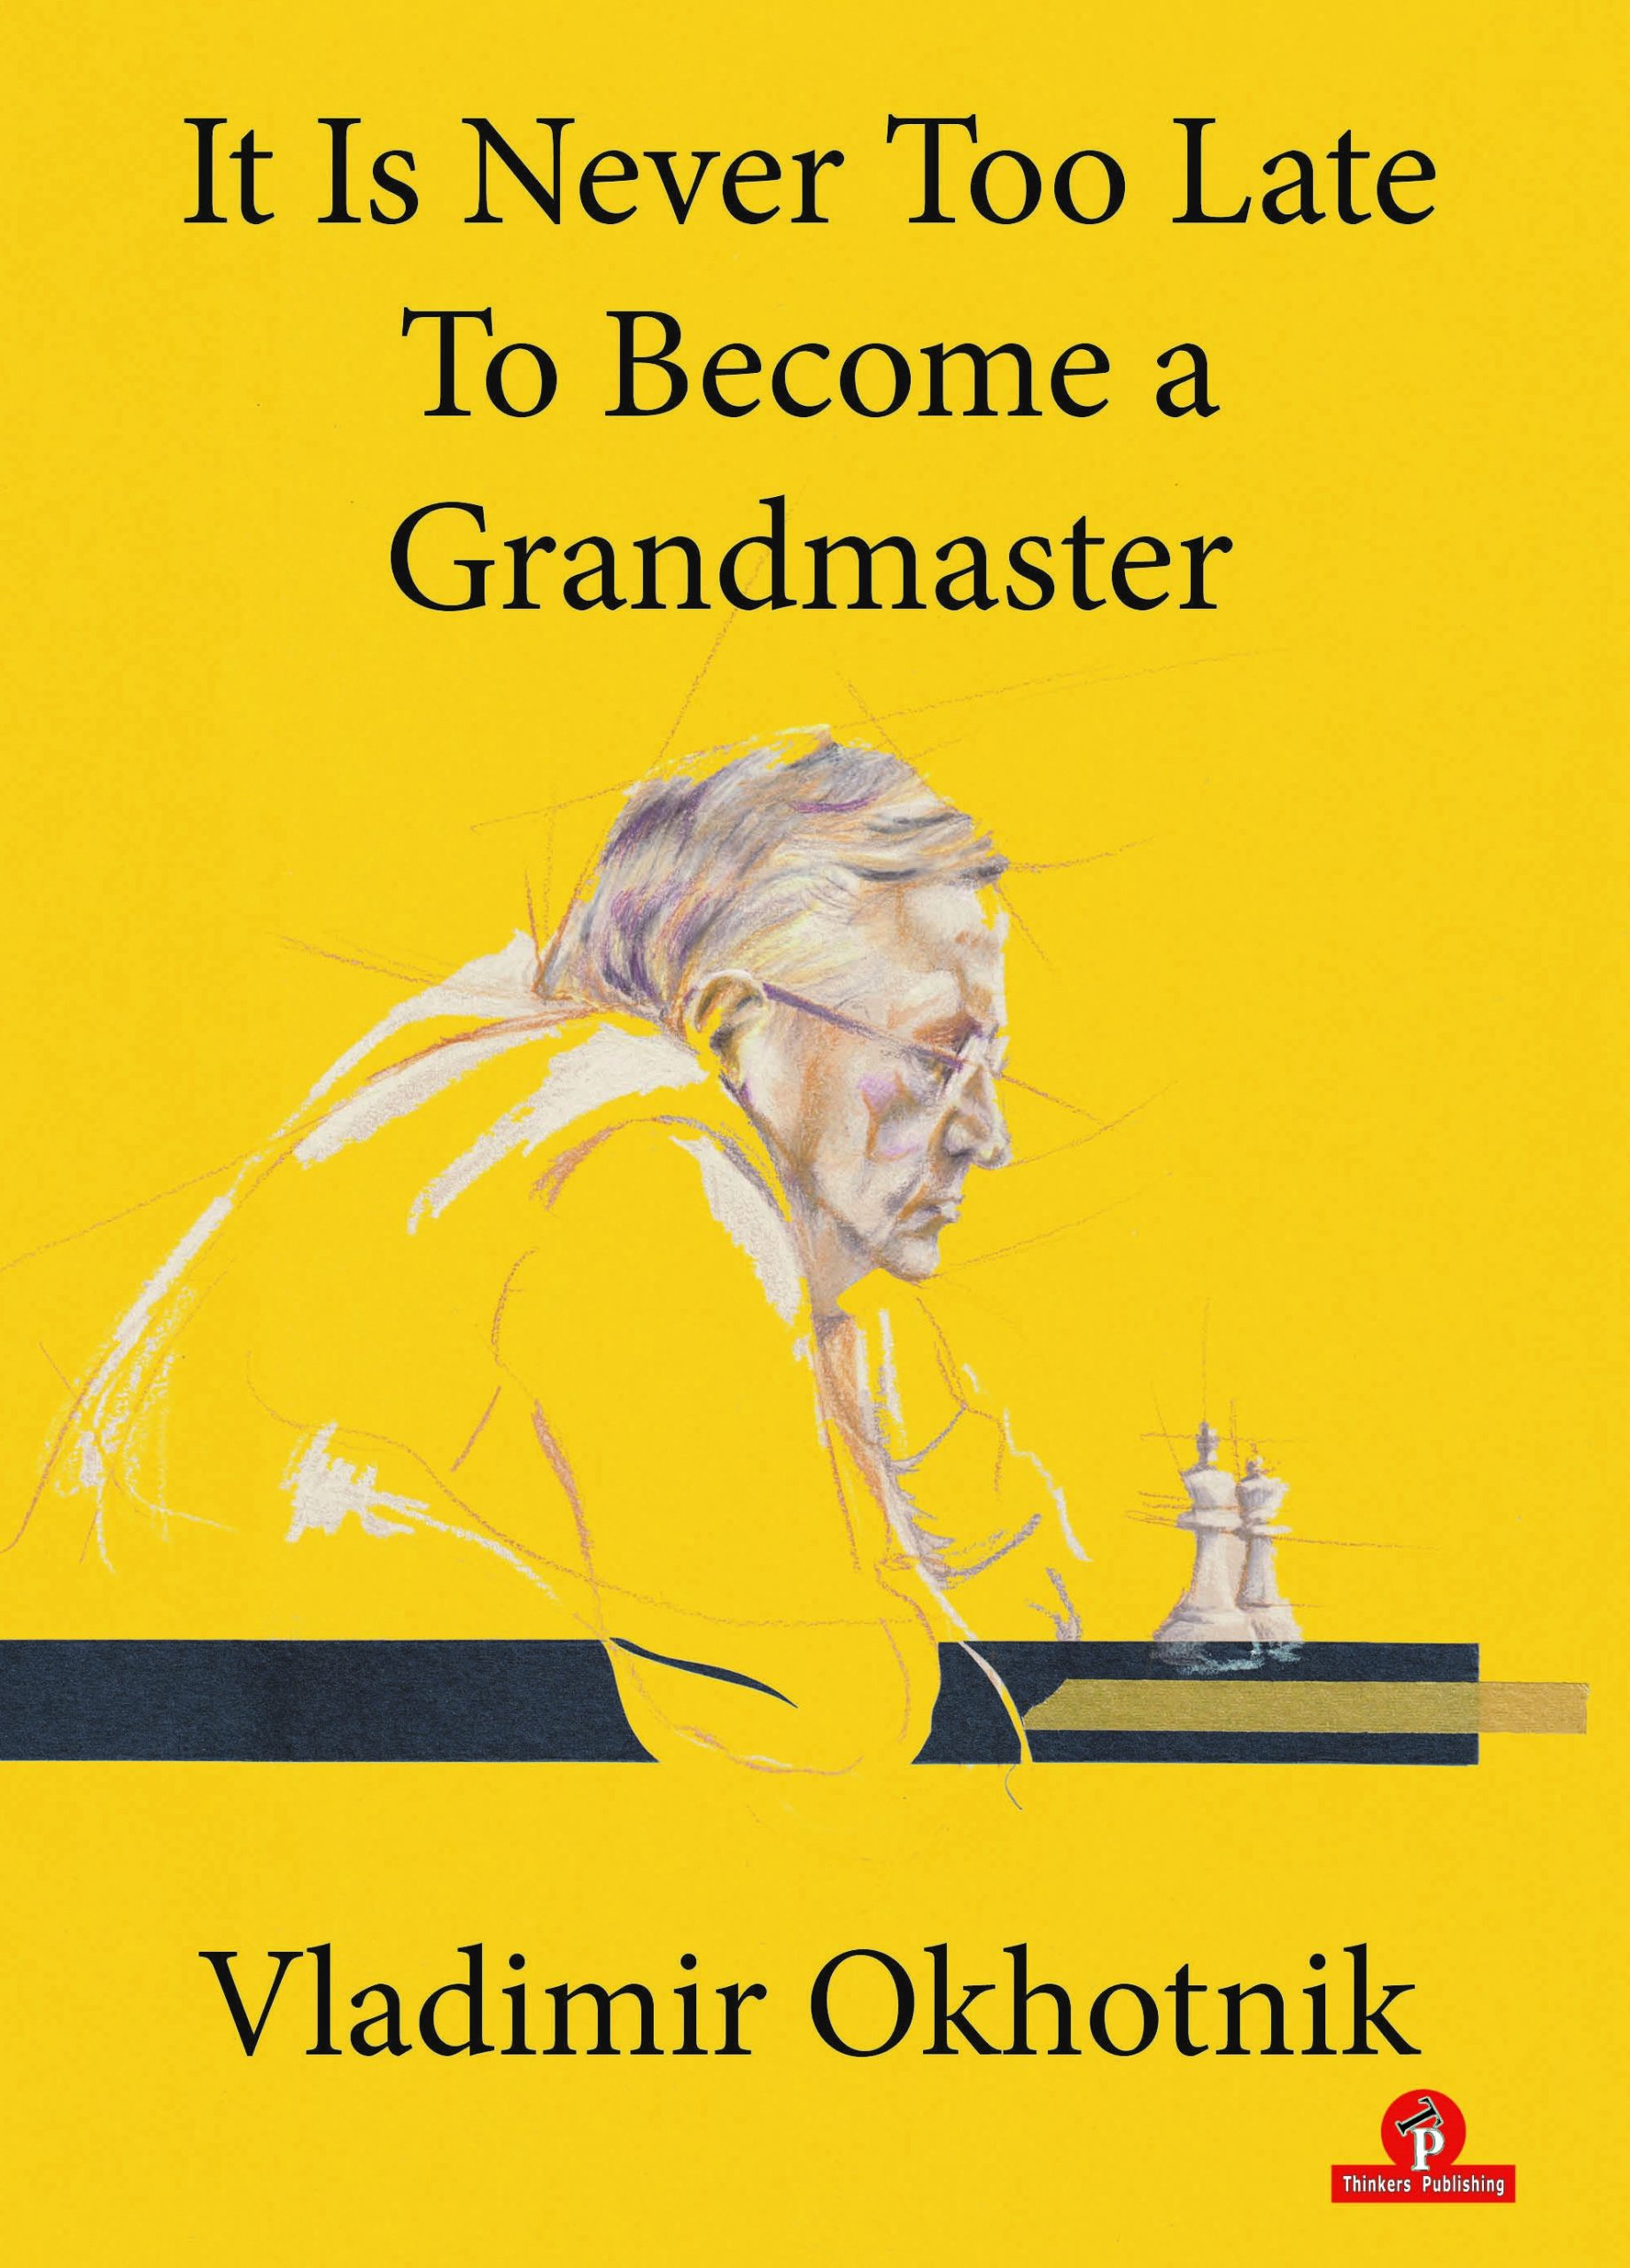 It is Never Too Late to Become a Grandmaster - Vladimir Okhotnic